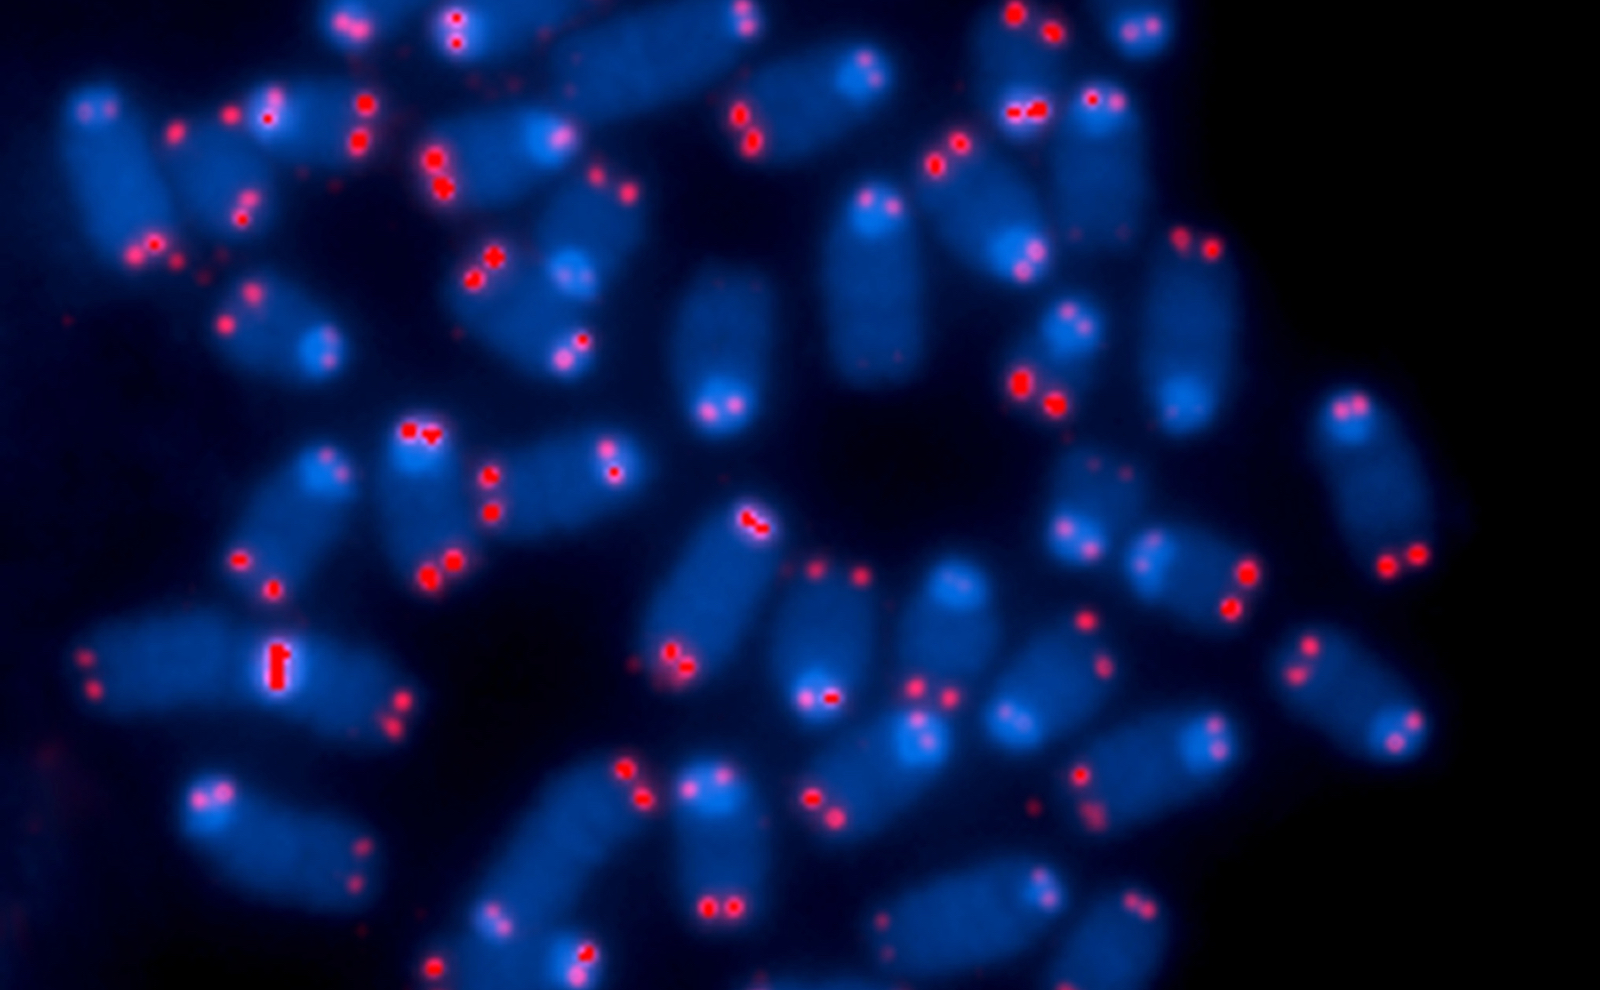 a microscope image of a bunch of glowing blue semi-oval shaped structures that are chromosomes. bright red dots are at the ends of the ovals, indicating telomeres